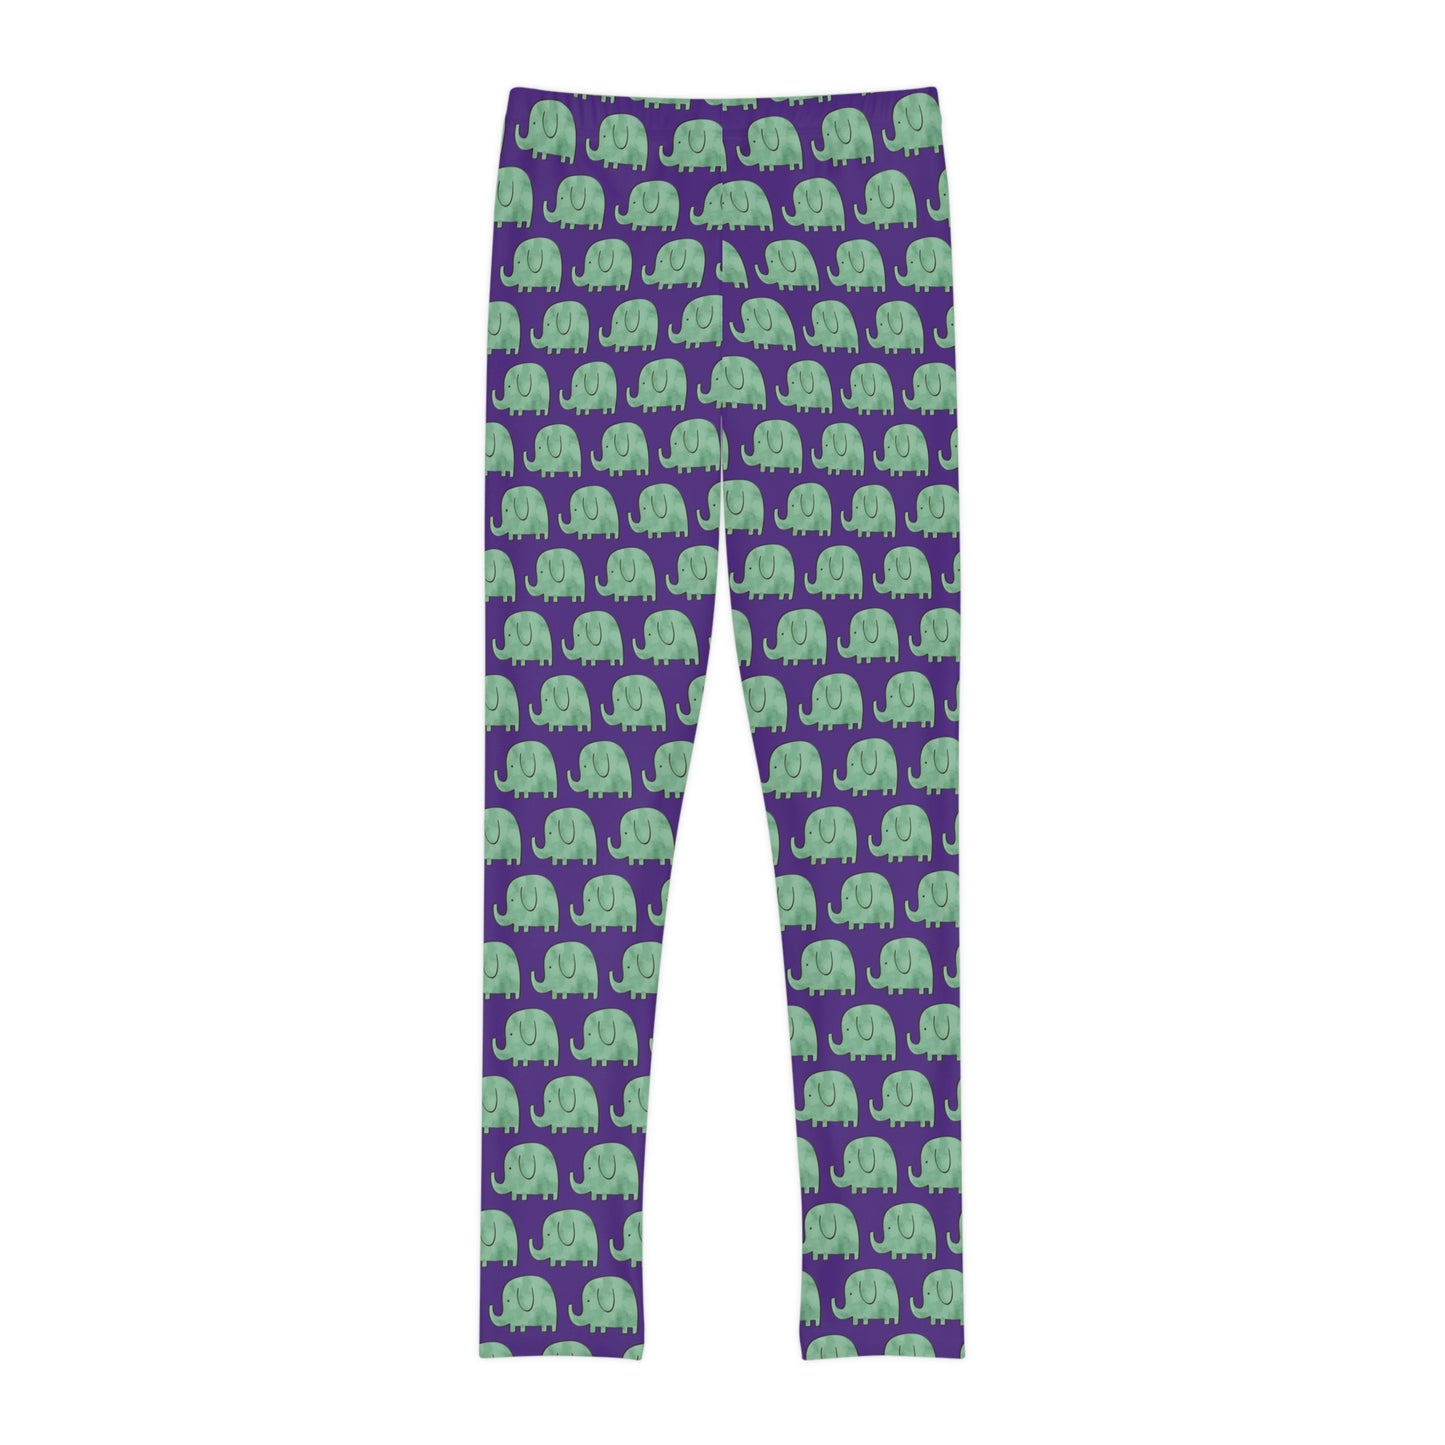 Elephant animal kingdom, Safari Youth Leggings,  One of a Kind Gift - Unique Workout Activewear tights for kids, Daughter, Niece  Christmas Gift